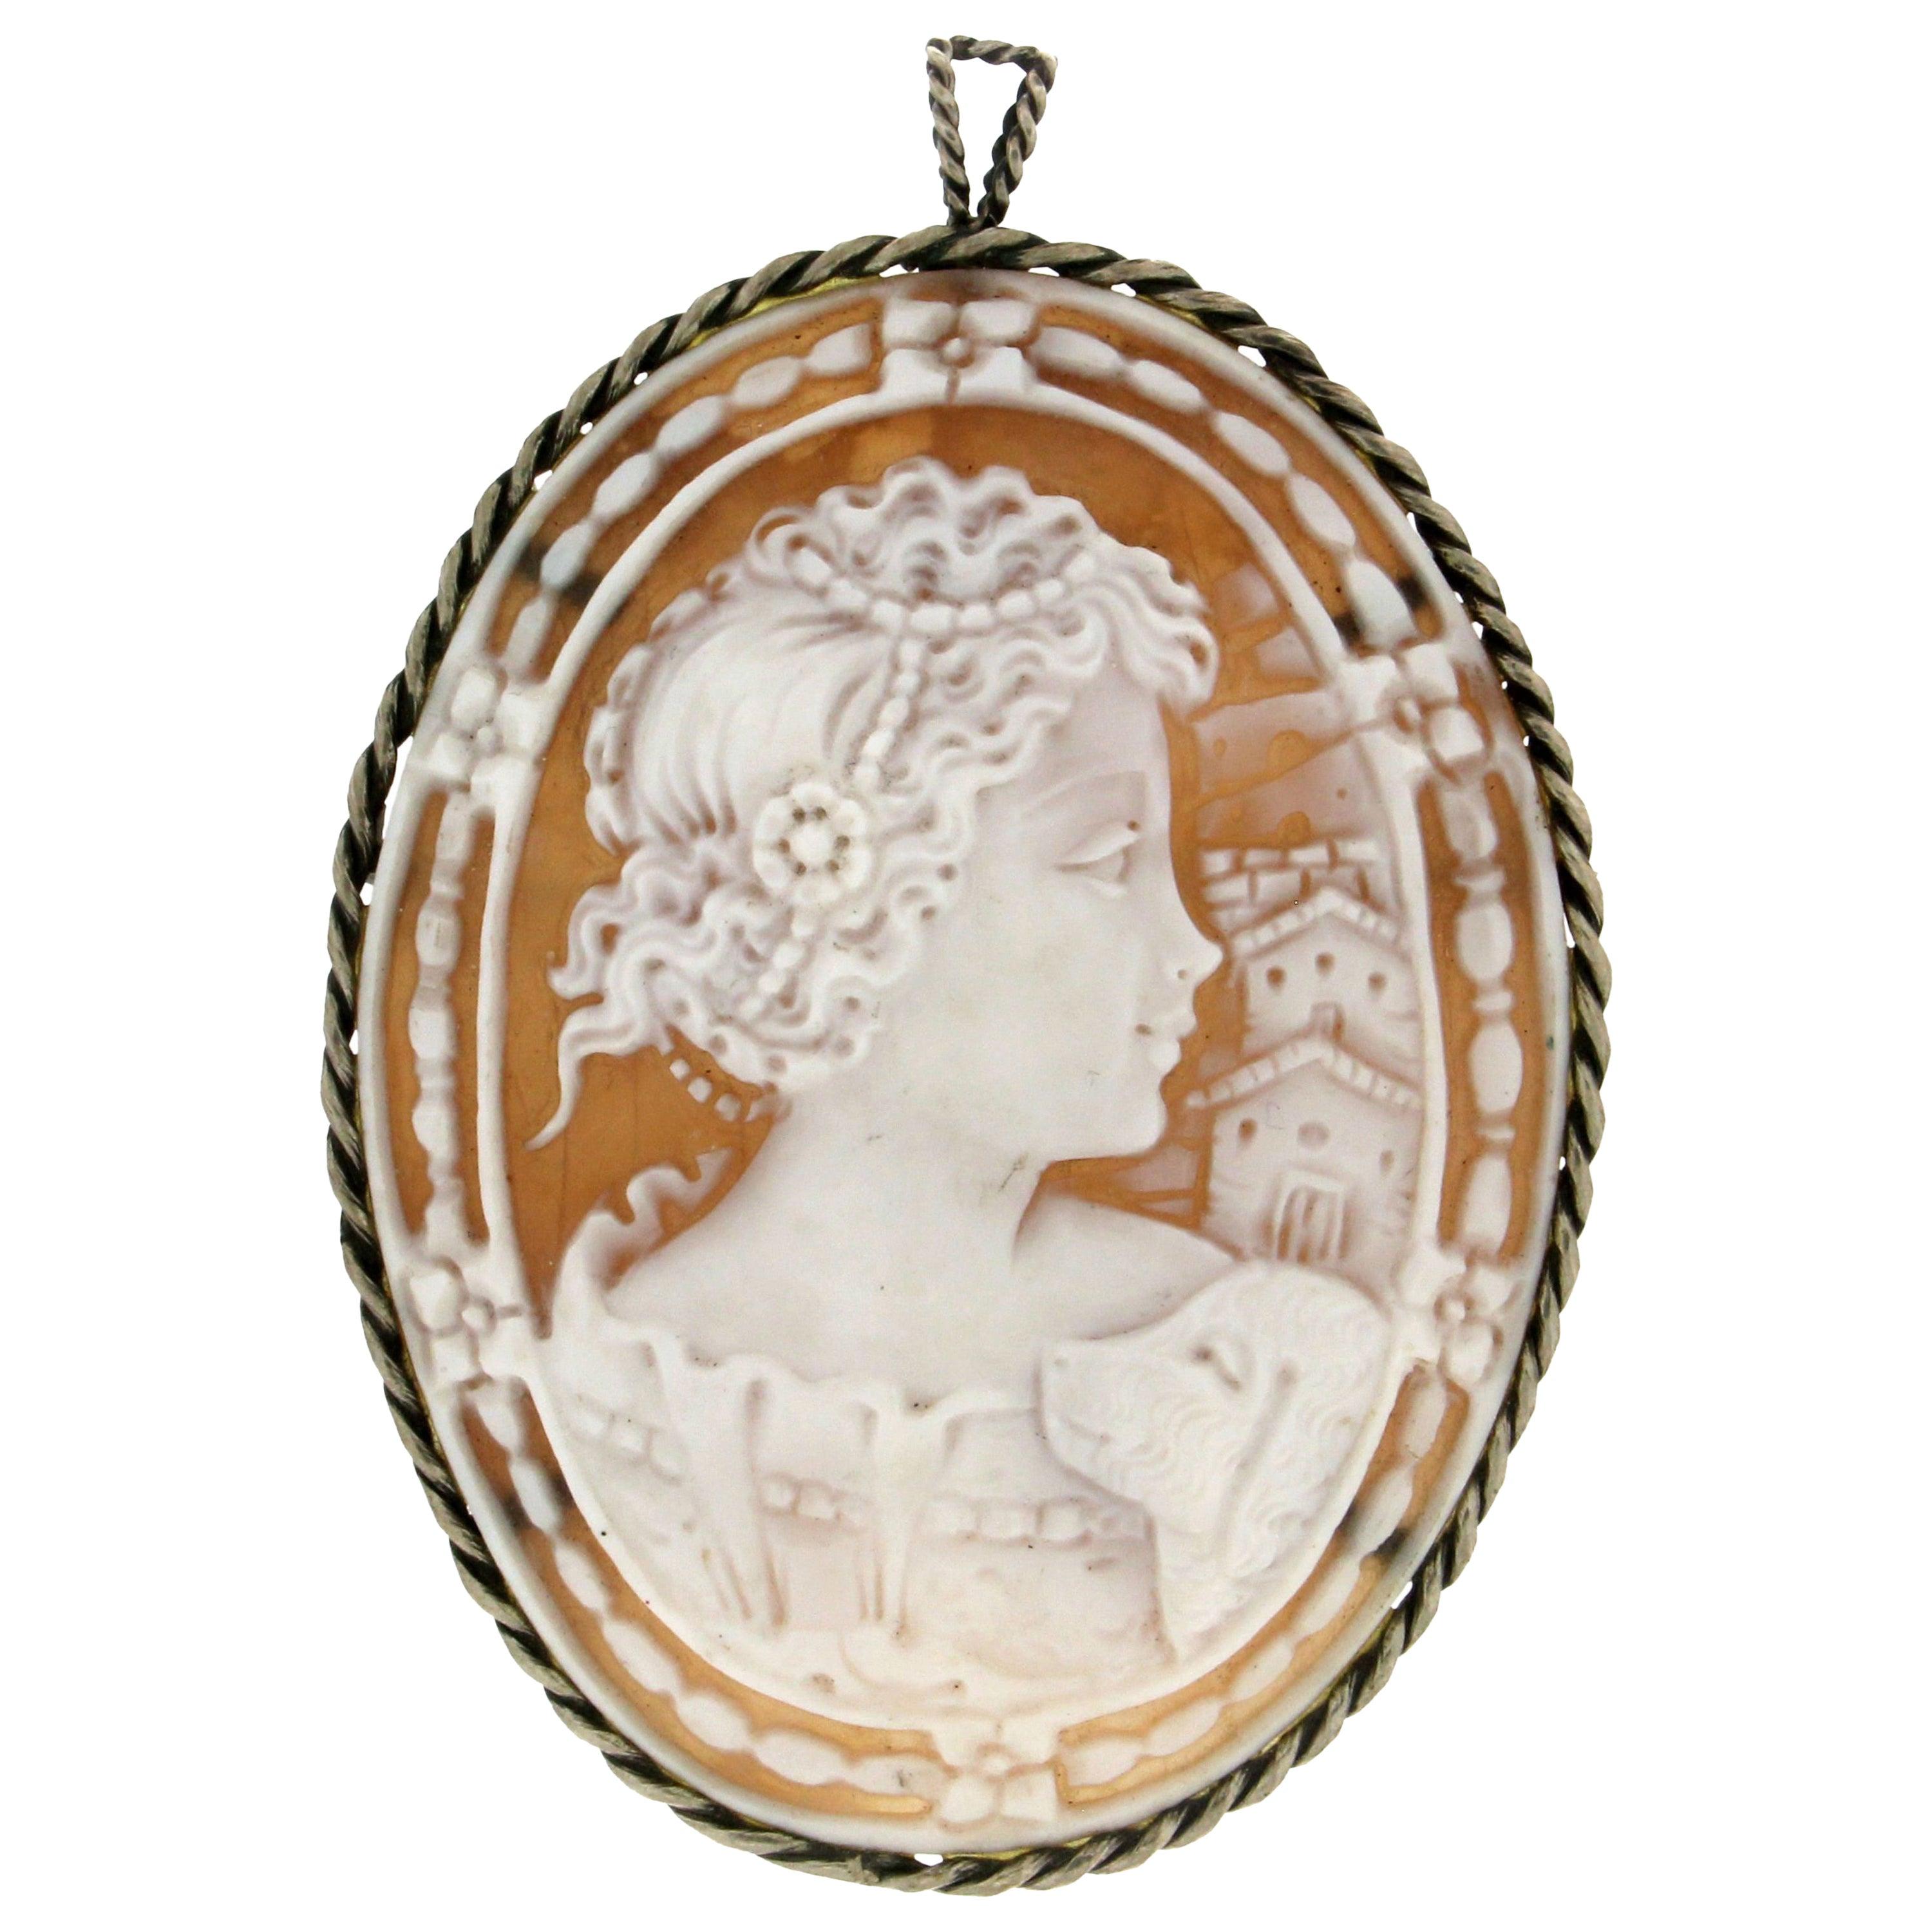 Handcraft Cameo 800 Thousandths Silver Brooch and Pendant Necklace For Sale